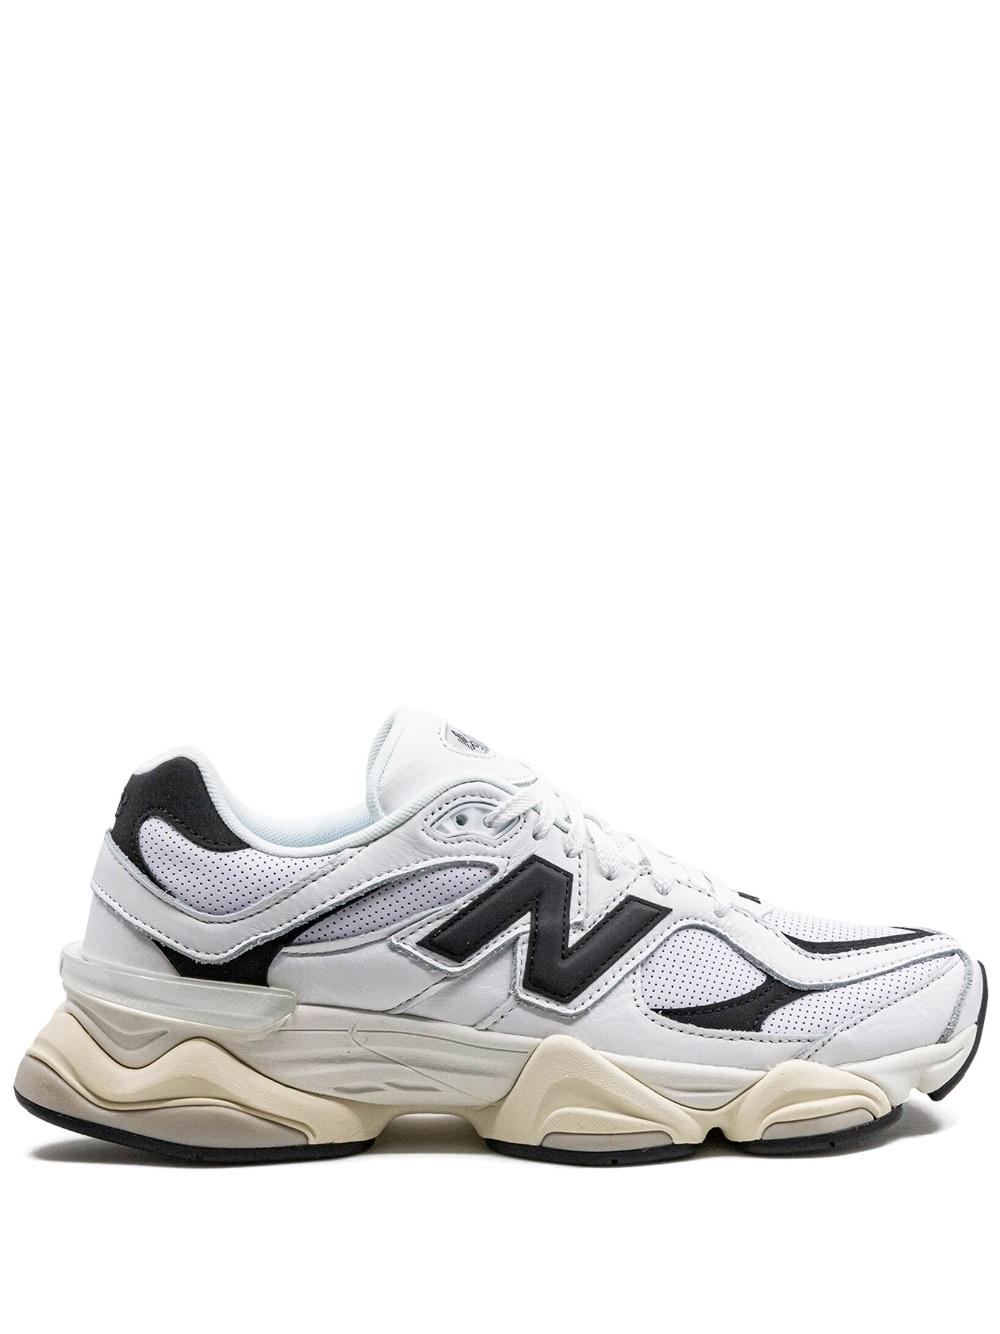 Restringir insuficiente molino New Balance 9060 Lace-up Sneakers in White | Lyst